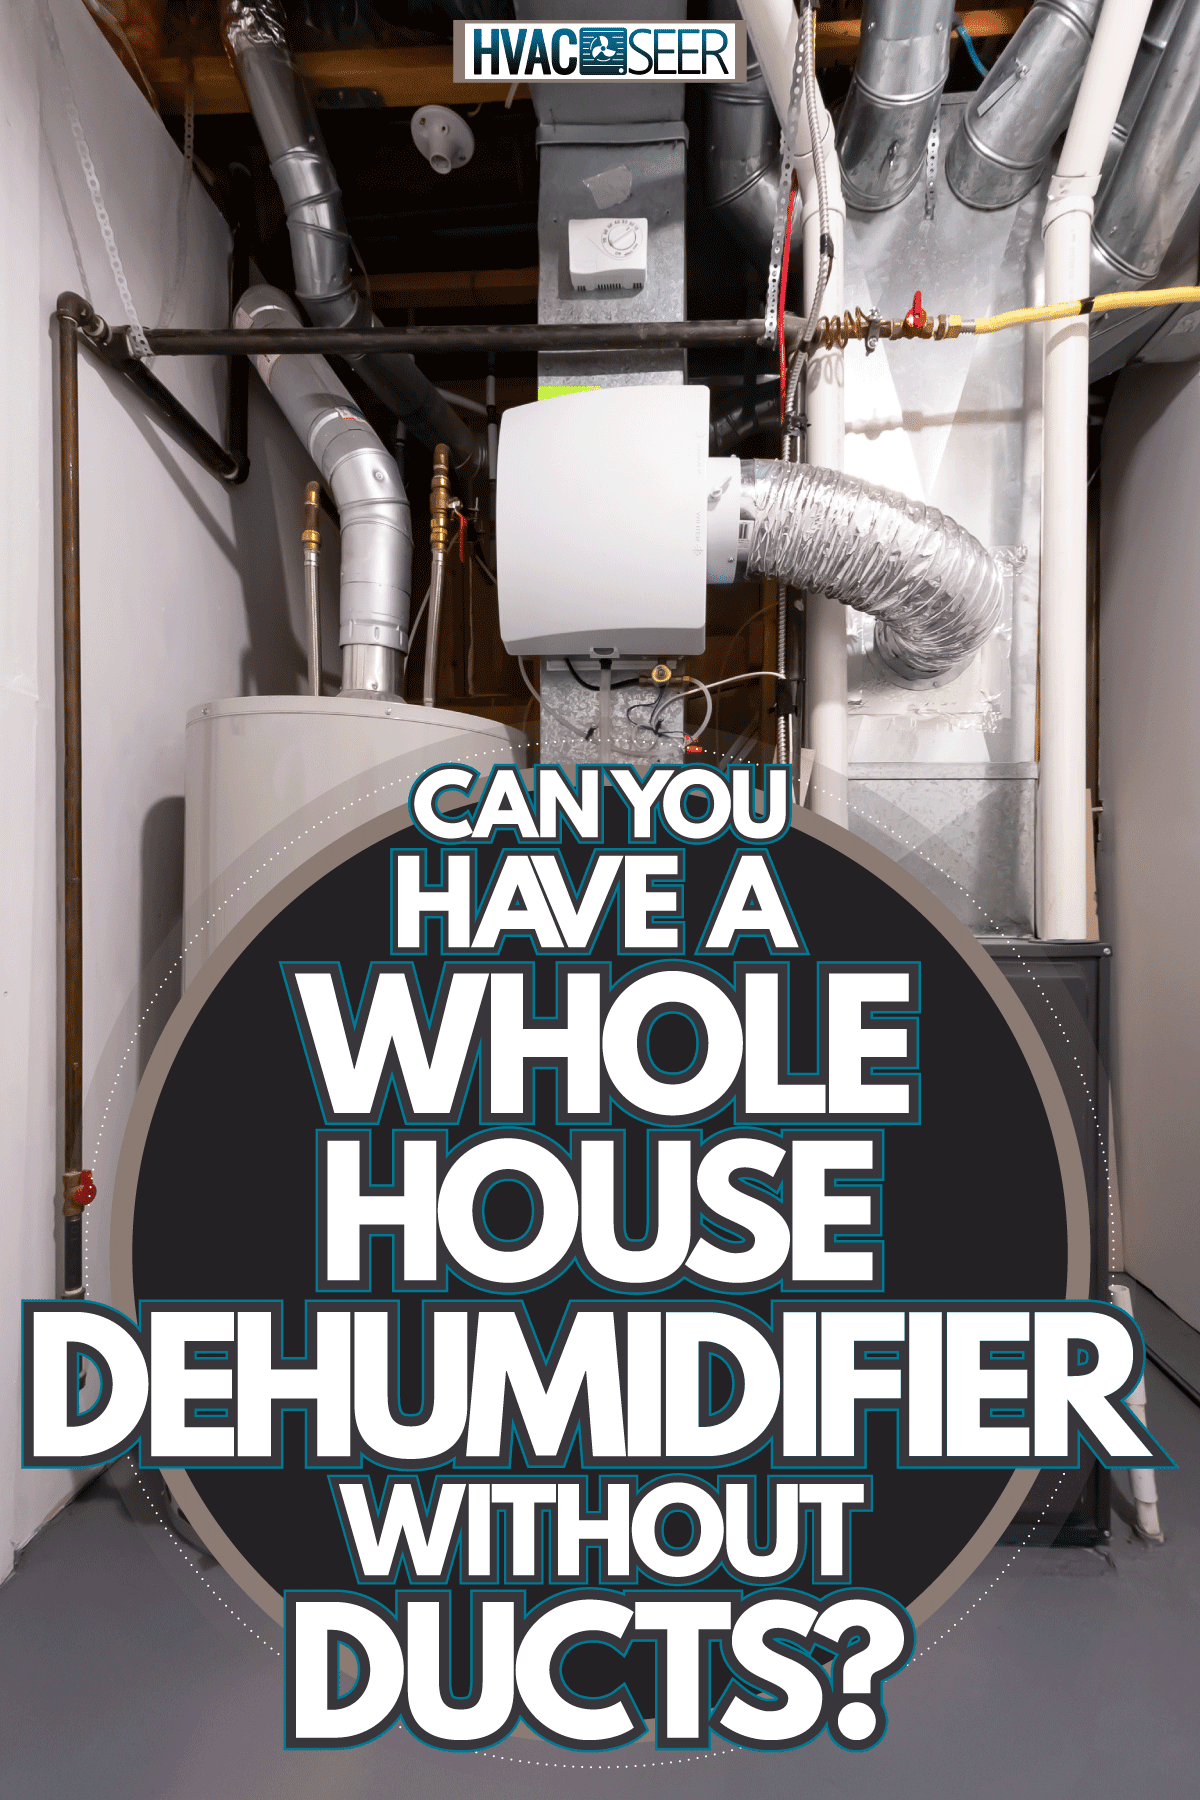 A boiler, furnace, and humidifier attached to the air duct, Can You Have A Whole House Dehumidifier Without Ducts?